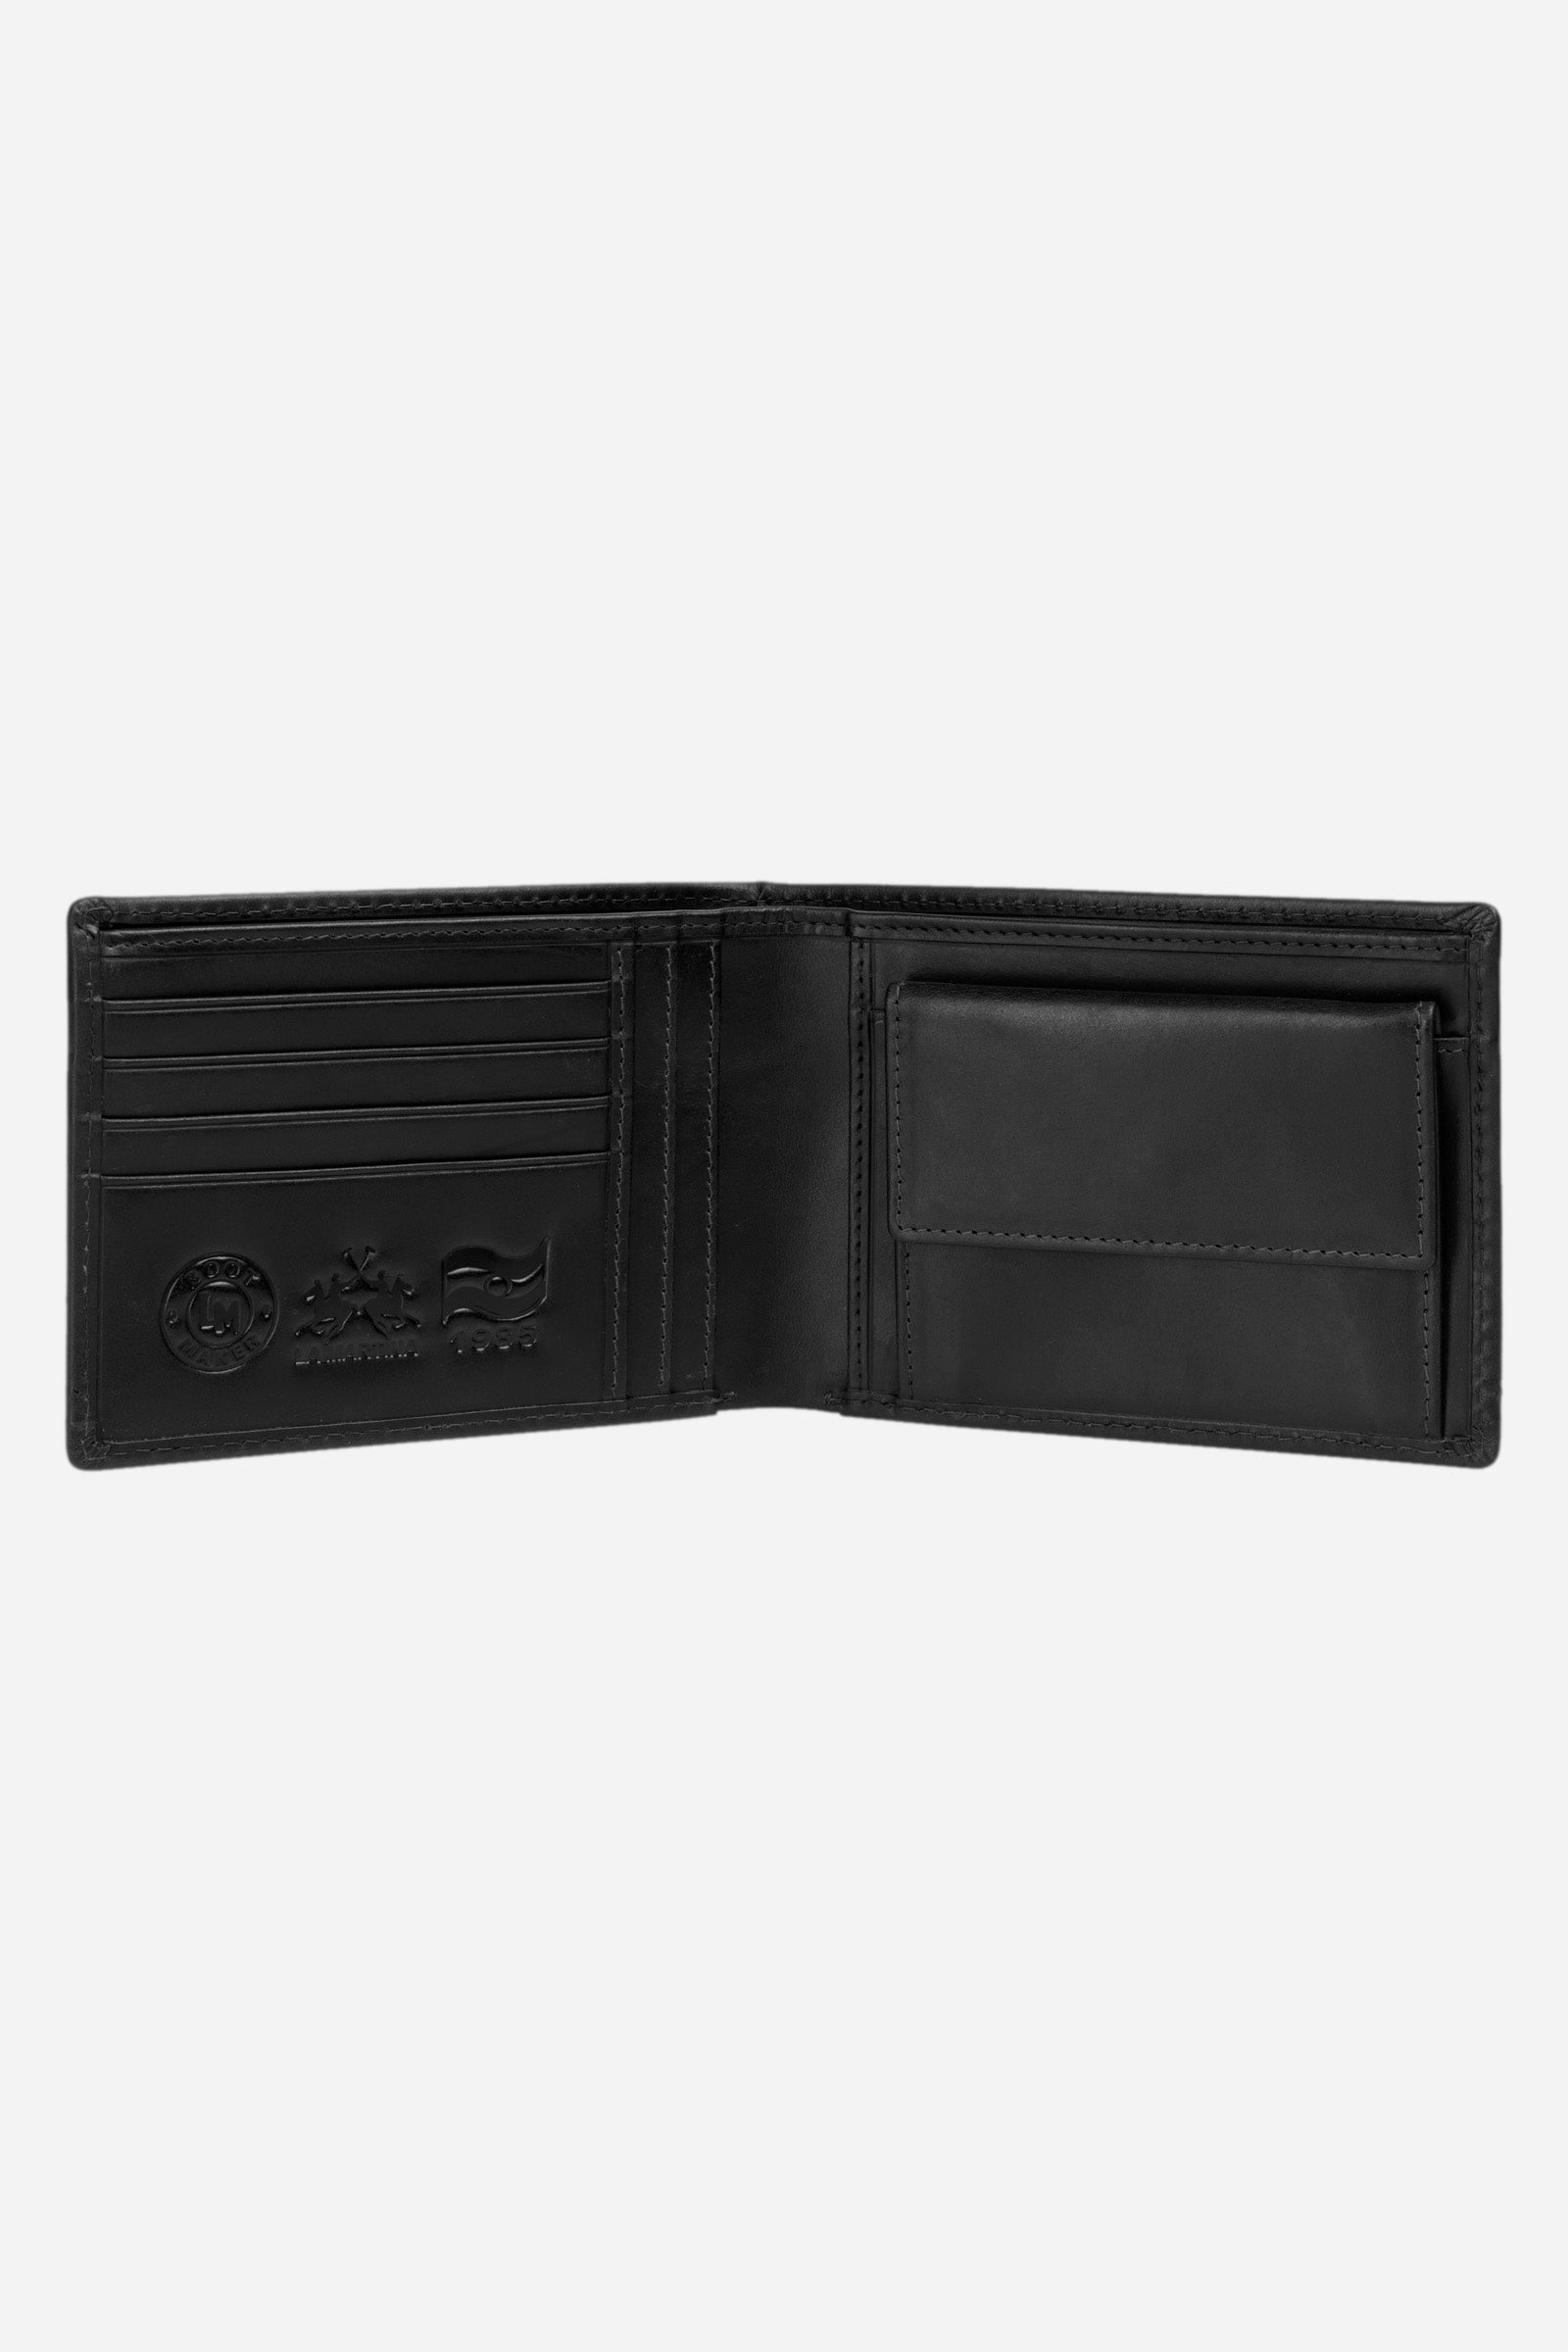 Men's leather wallet with coin purse - Axel